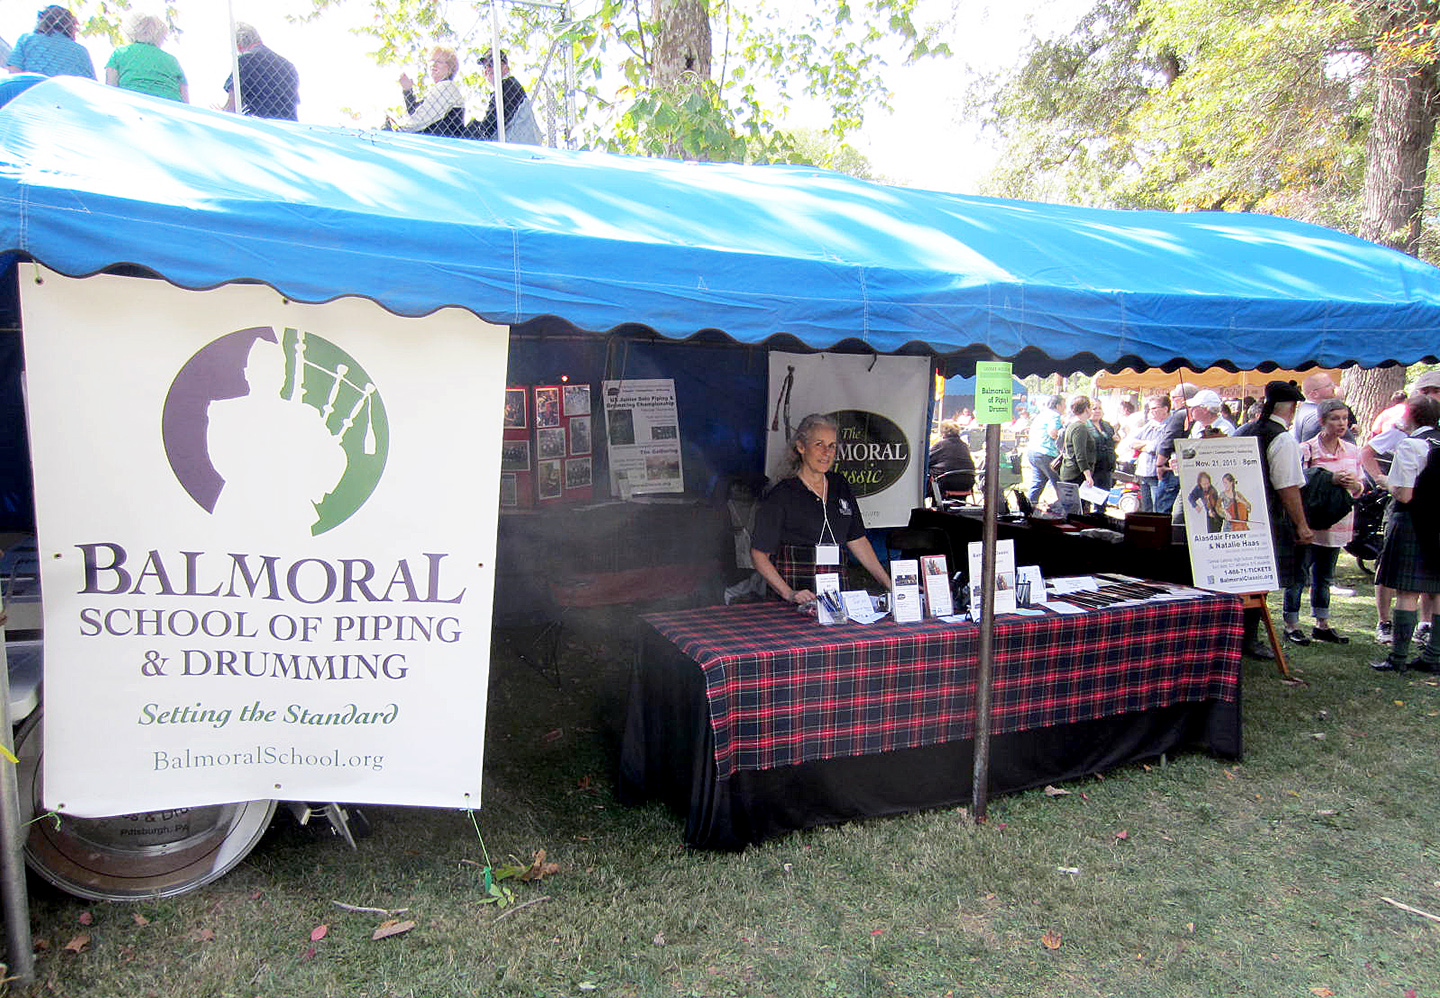 The Balmoral School of Piping's booth at the Ligonier Highland Games,